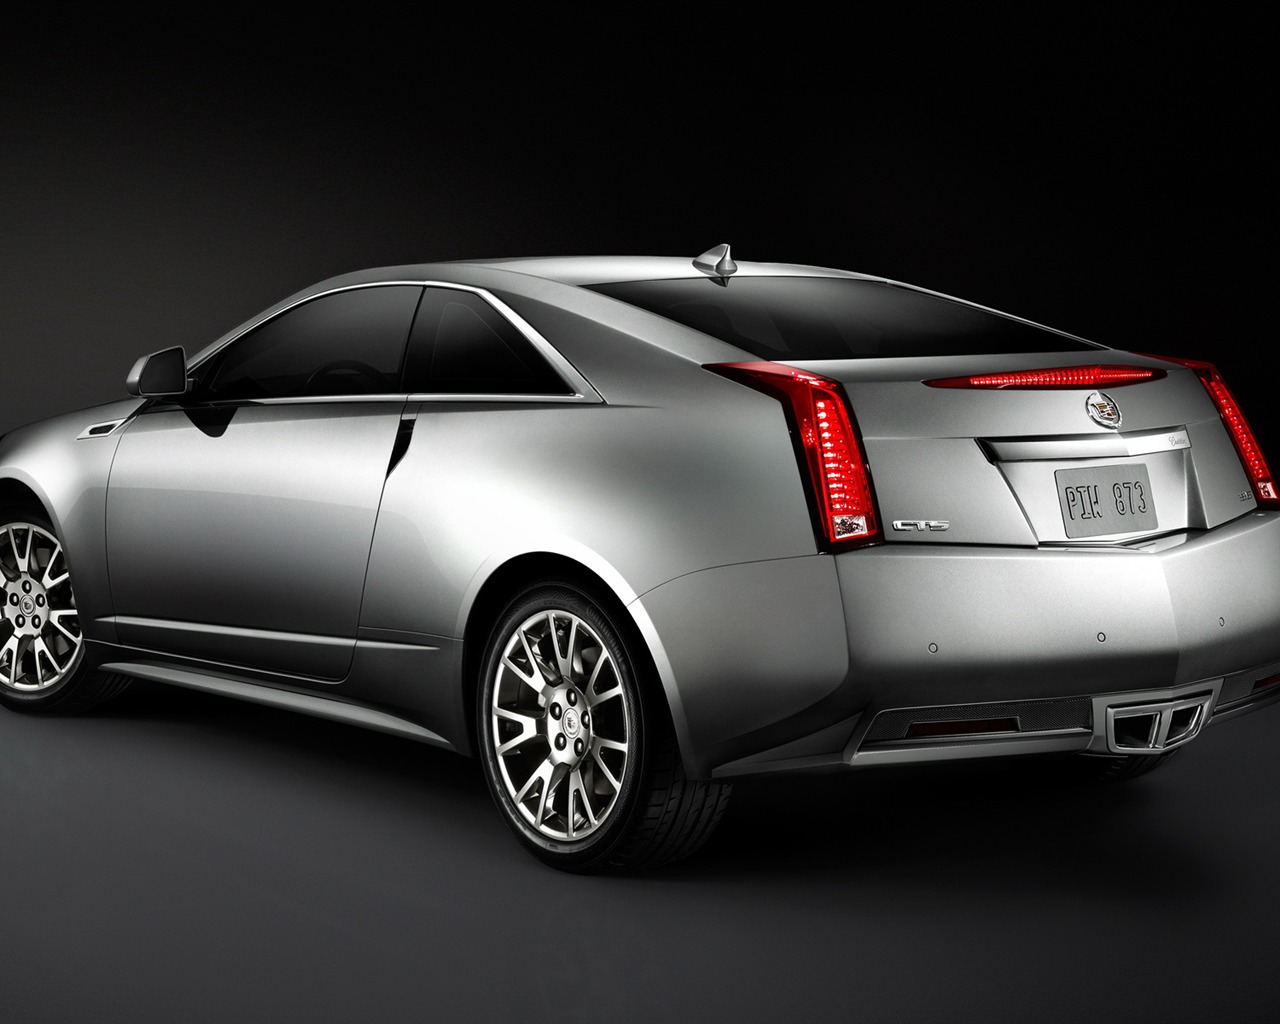 Cadillac CTS Coupe - 2011 凱迪拉克 #6 - 1280x1024